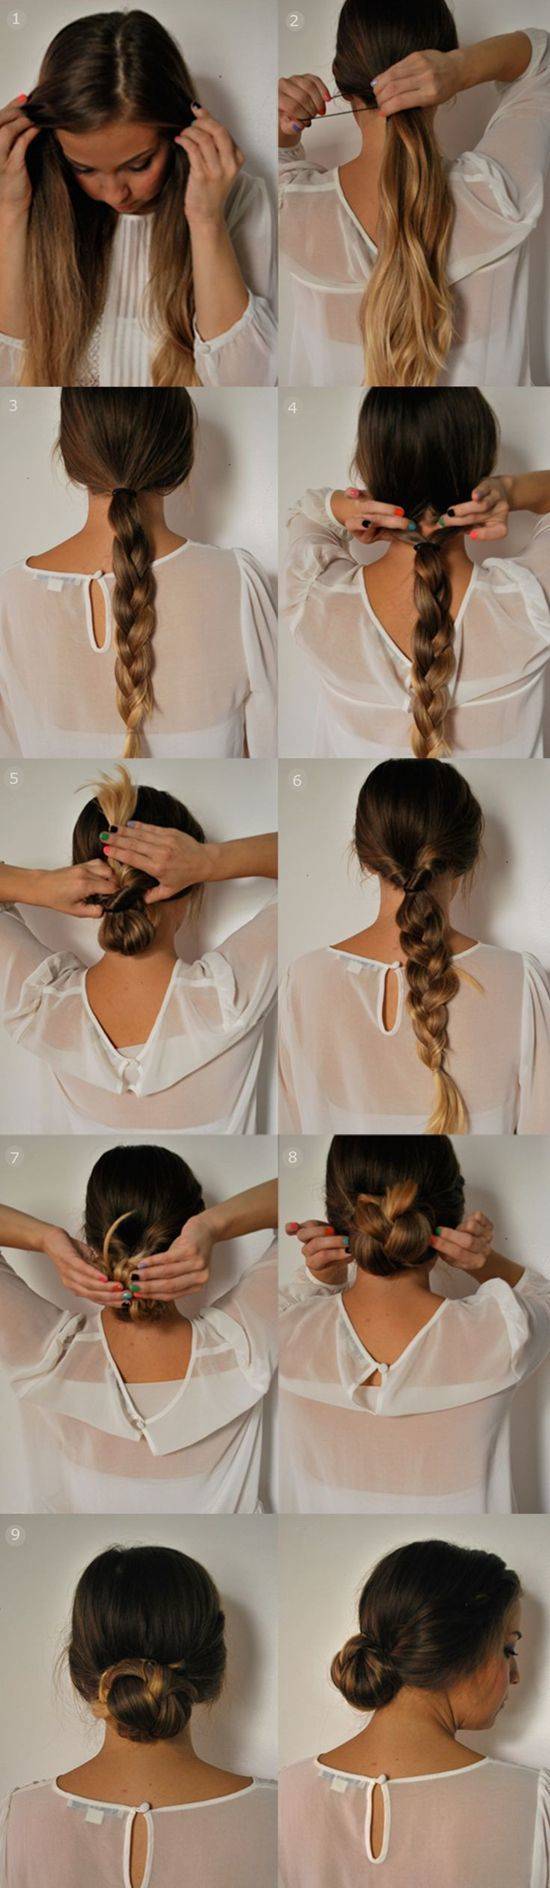 1451793354 quick 5 minutes updo braided ponytail updo